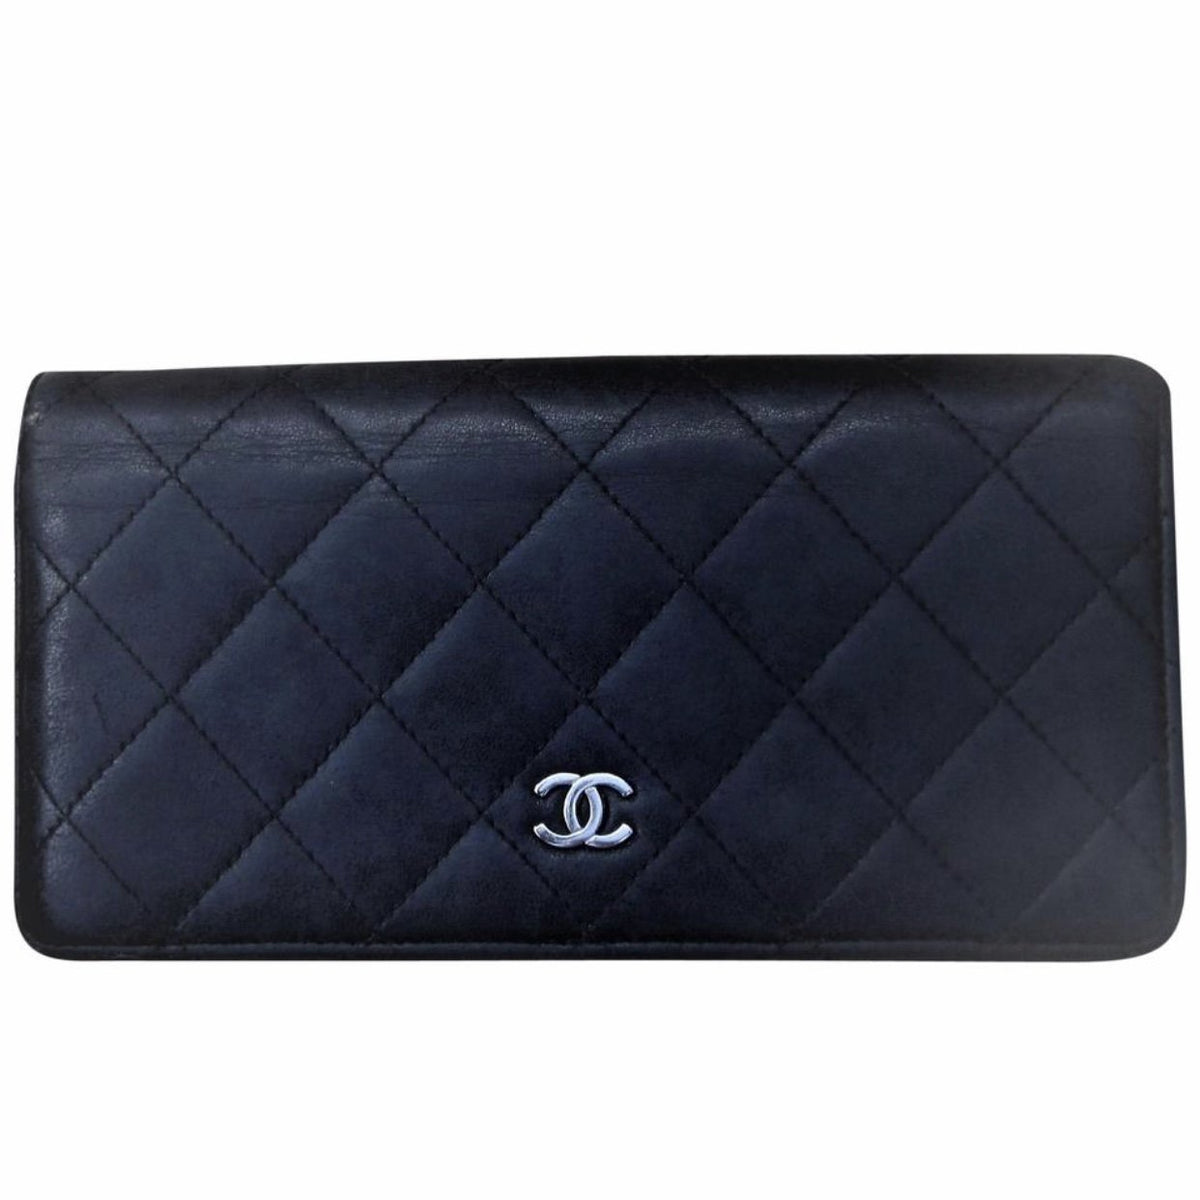 Chanel Black Quilted Leather Classic CC Trifold Wallet Chanel